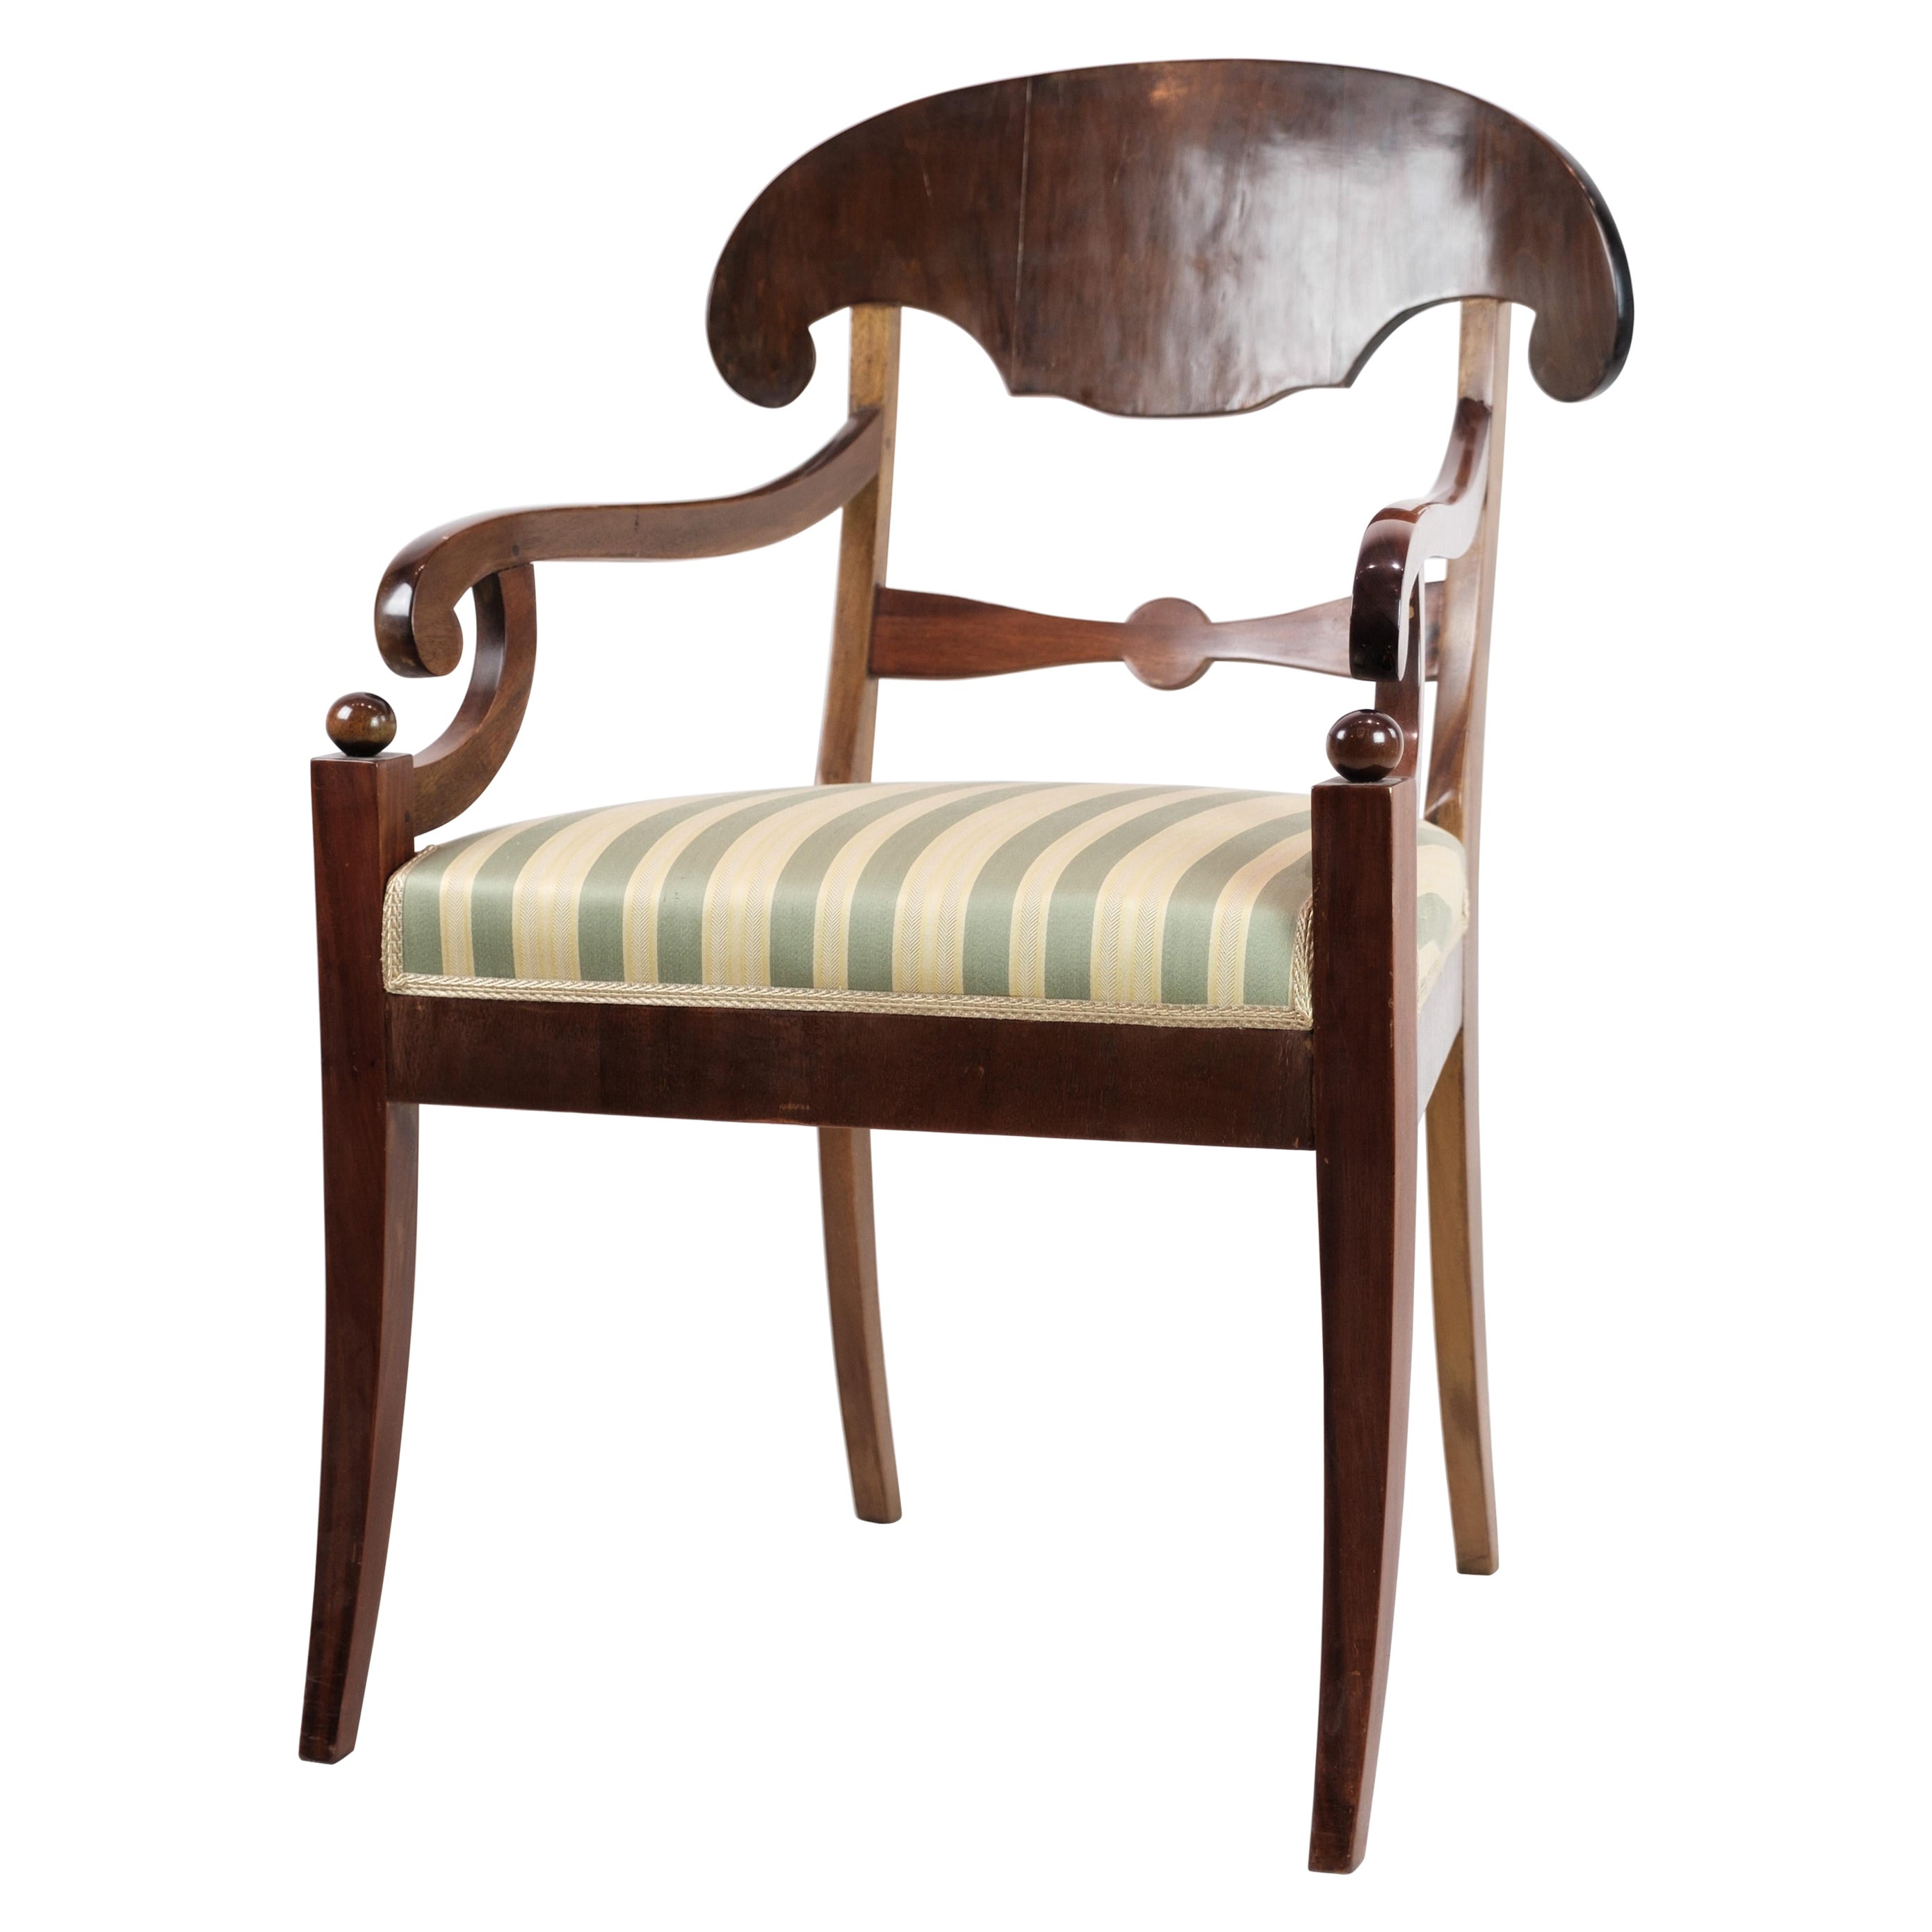 Late Empire Armchair Made In Mahogany With Light Striped Fabric From 1840s